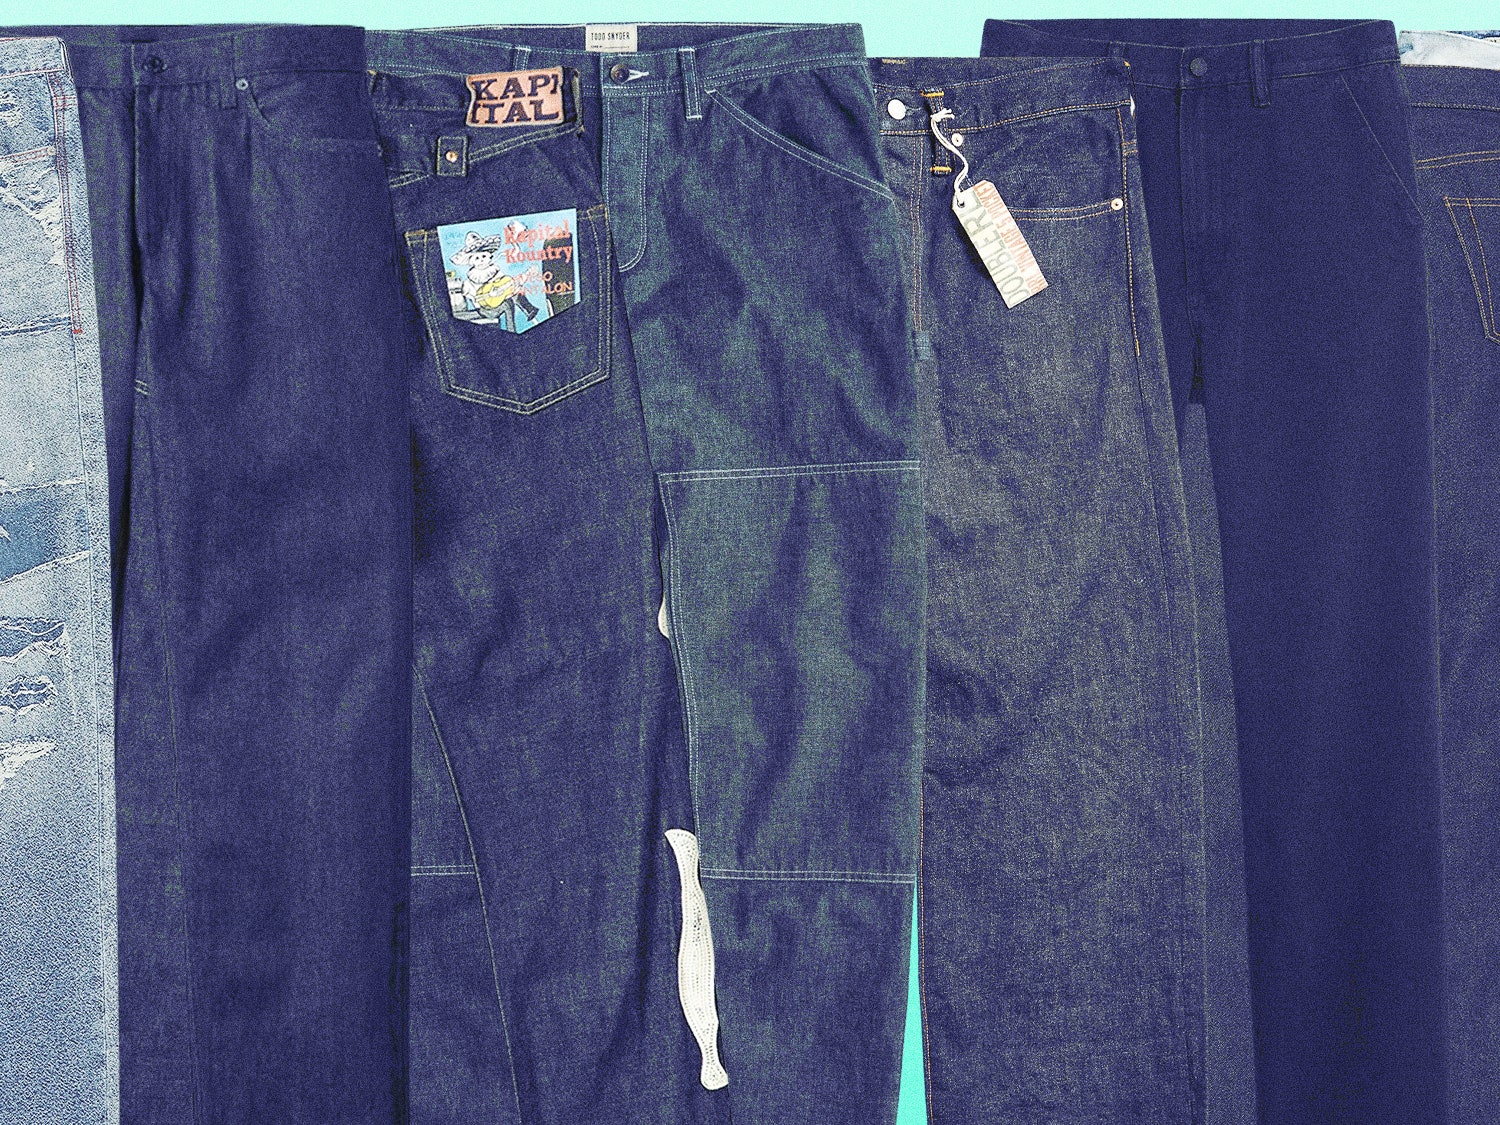 27 Jeans Brands Every Denim Enthusiast Should Know